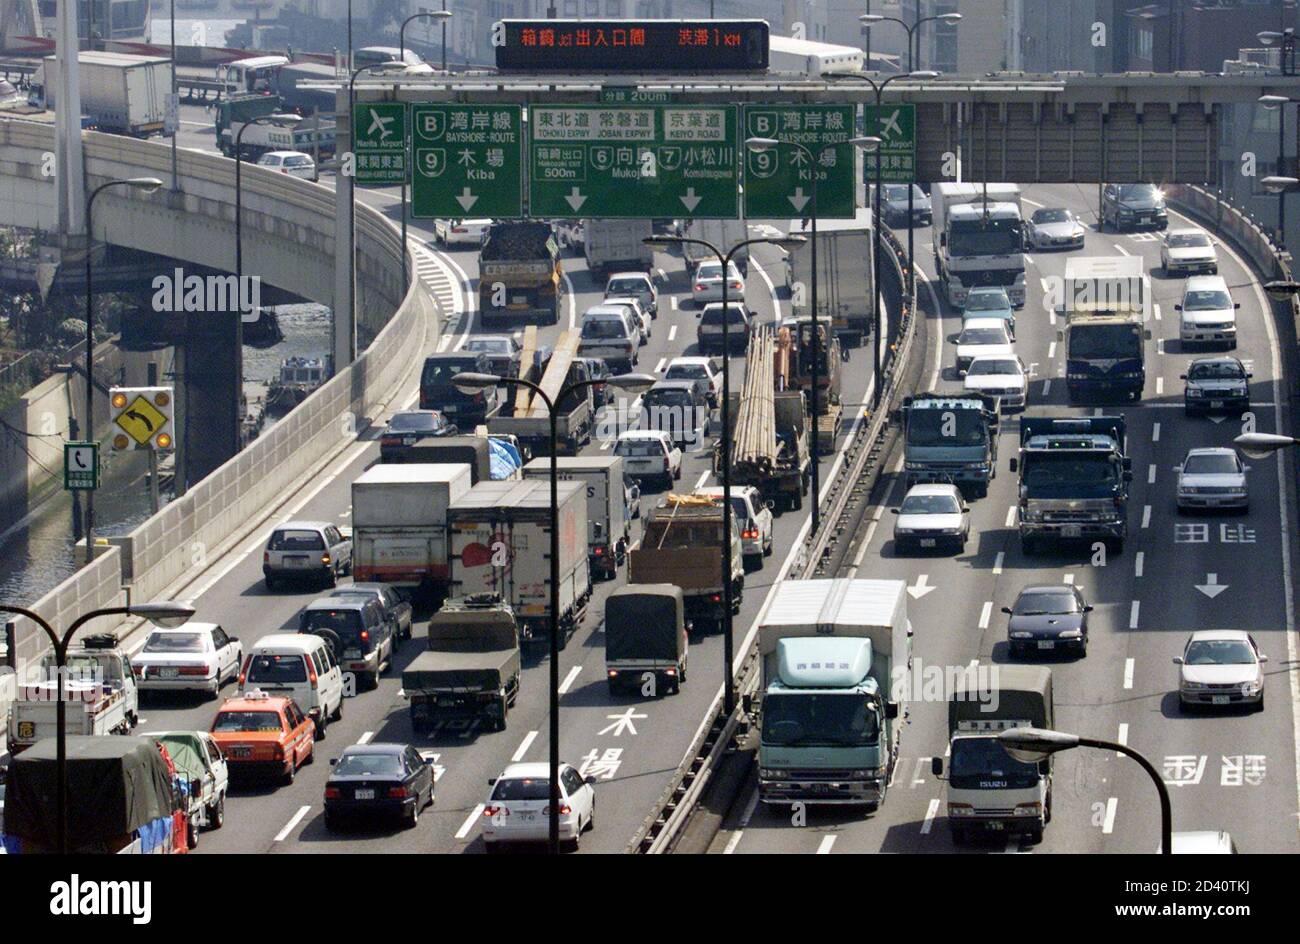 Vehicles are trapped in traffic on a Tokyo expressway on March 14, 2001.  Japan's Transport Ministry plans to offer subsidies to bus and truck  operators in the three main metropolitan regions to